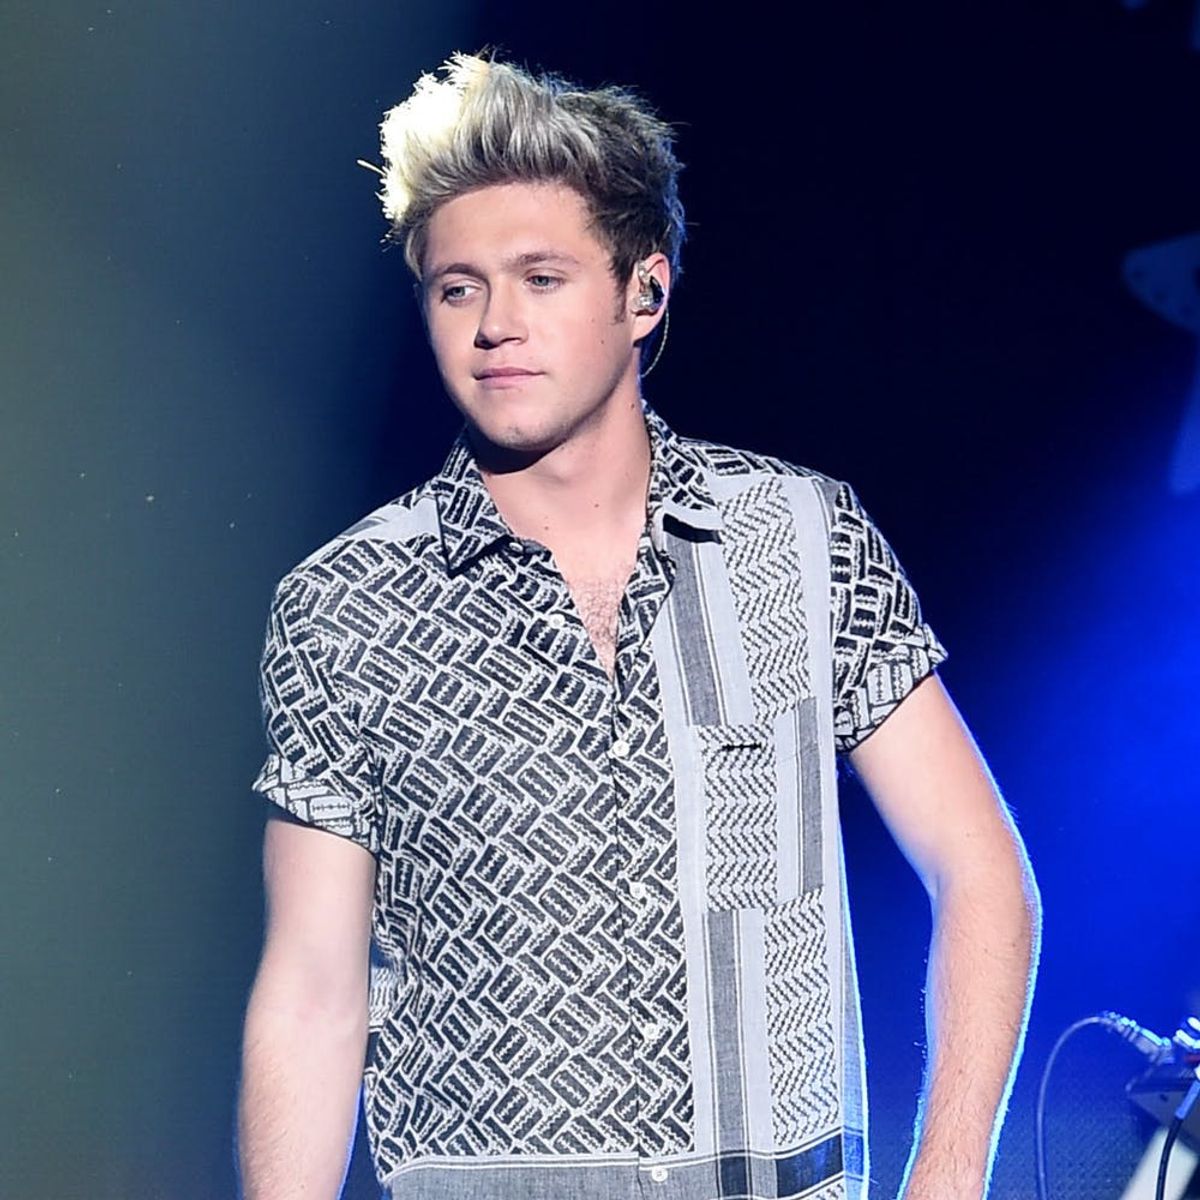 Niall Horan Is Unrecognizable With His New Hair